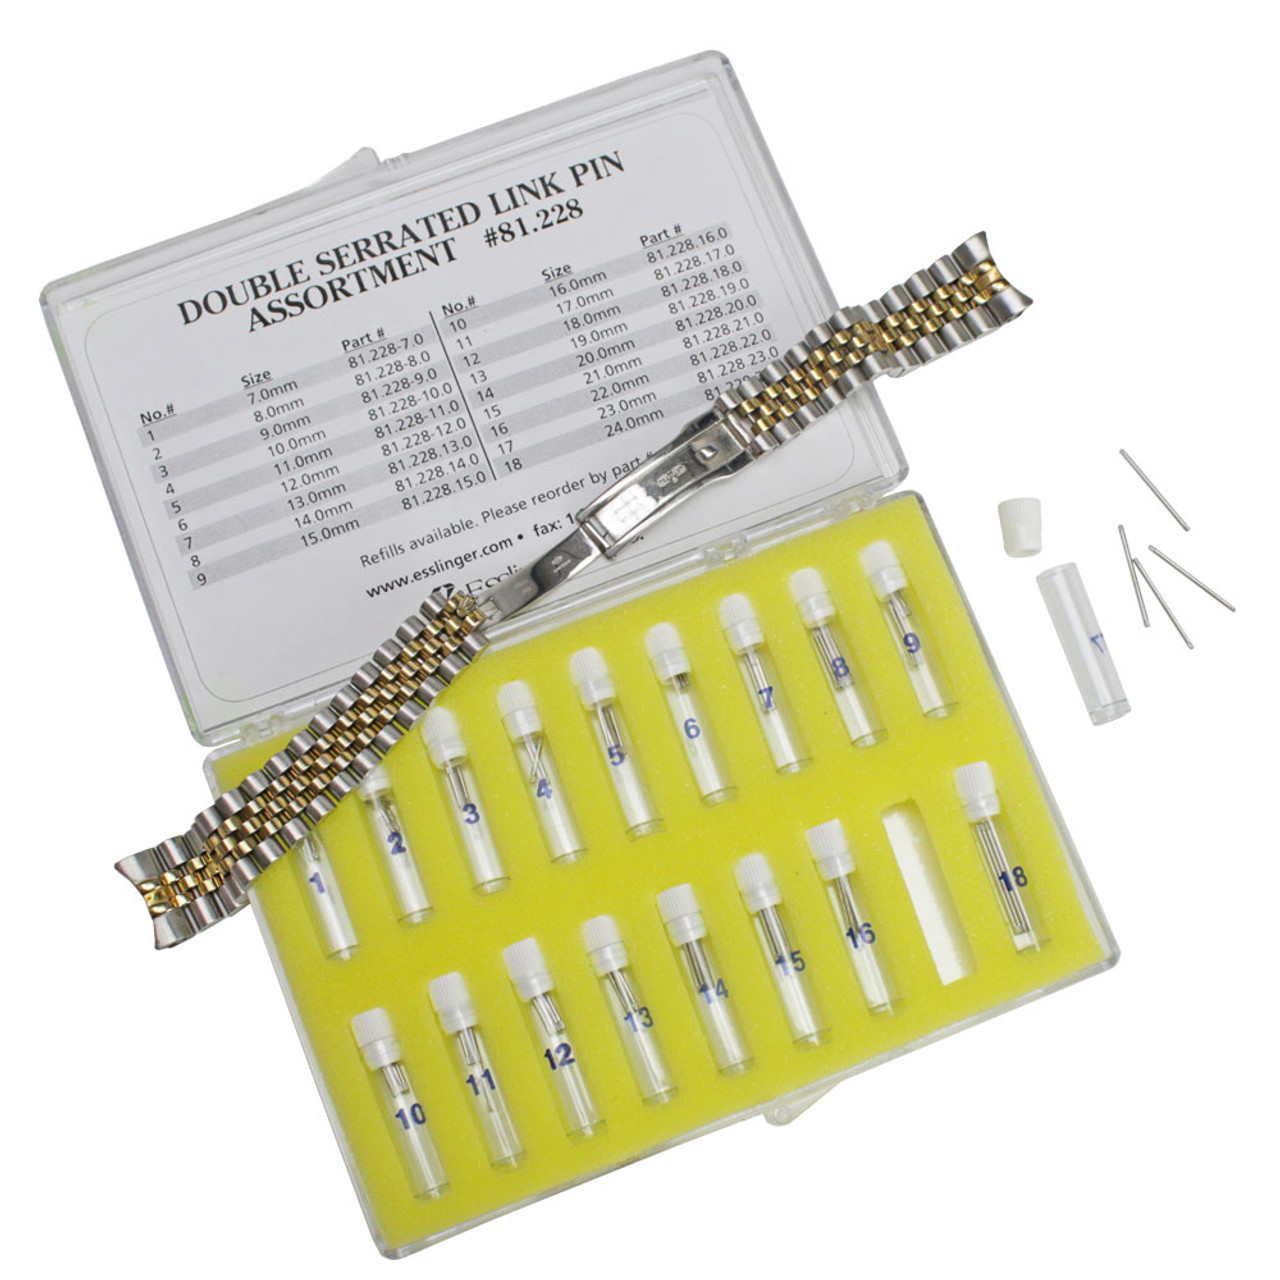 Double Serrated Link Pin Refills For Watch Bands